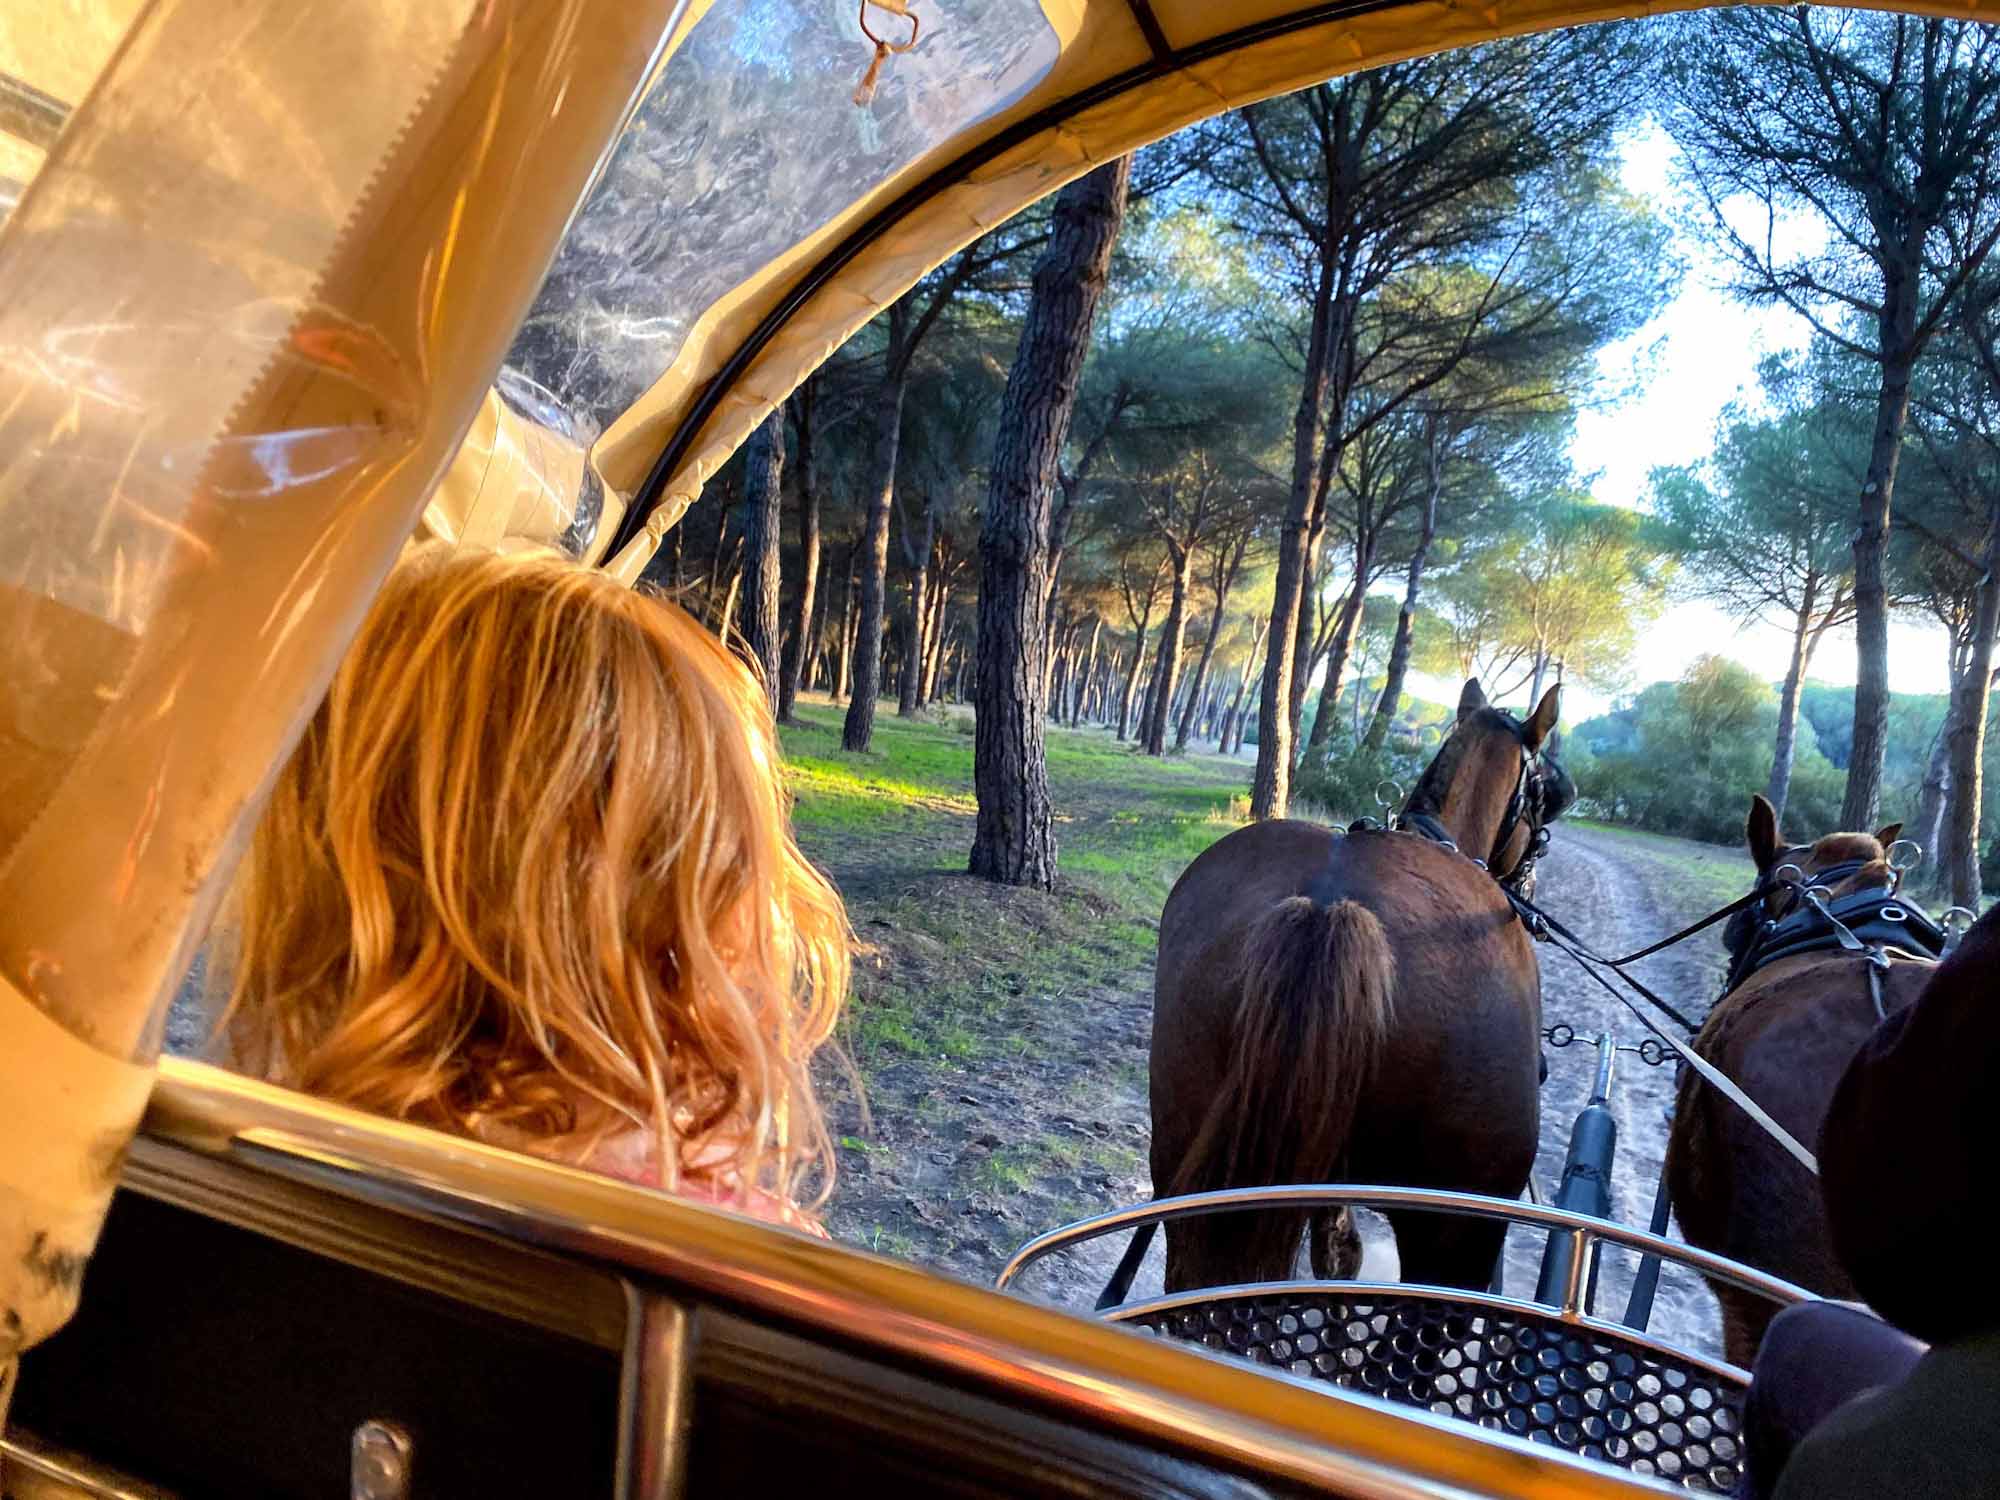 View of the horses from a horse-drawn carriage, riding through woodland